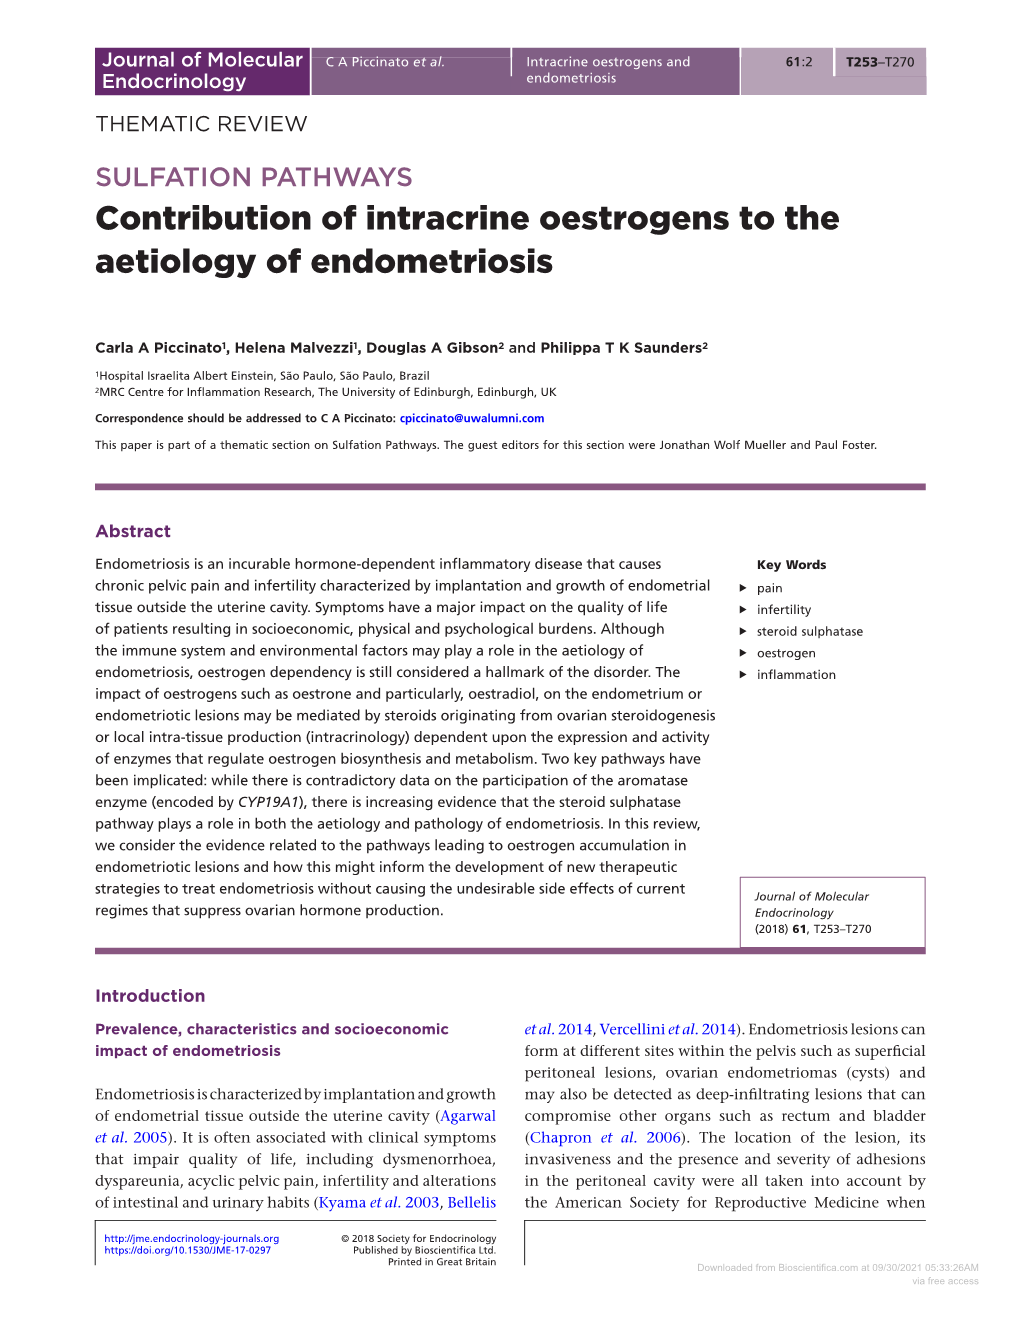 Contribution of Intracrine Oestrogens to the Aetiology of Endometriosis